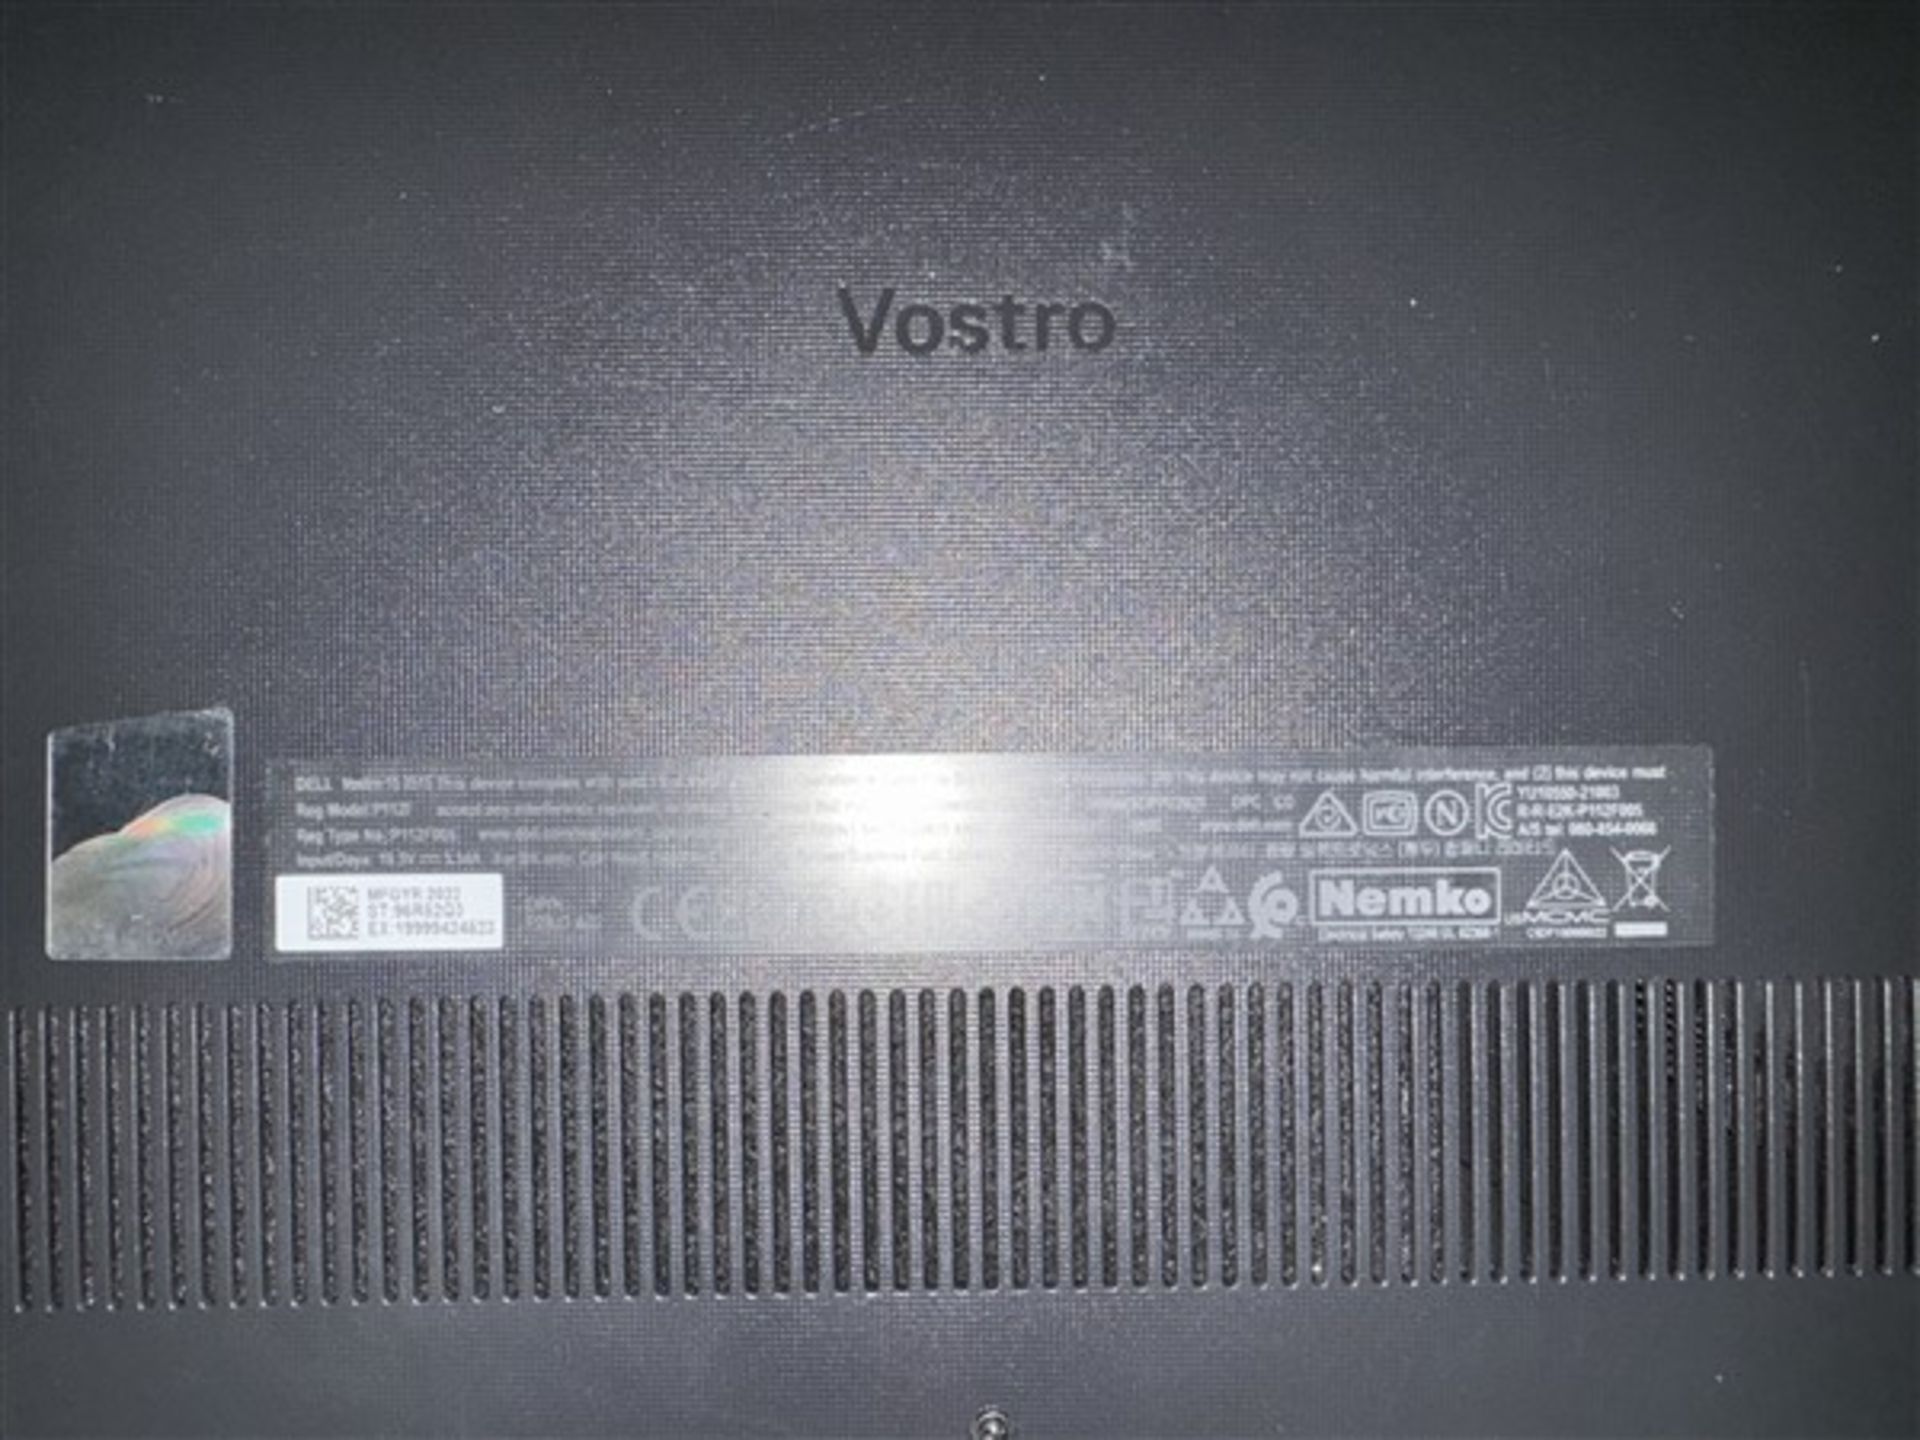 Dell Vostro laptop (2022) Model: 15315 (No Charger) - Image 4 of 4